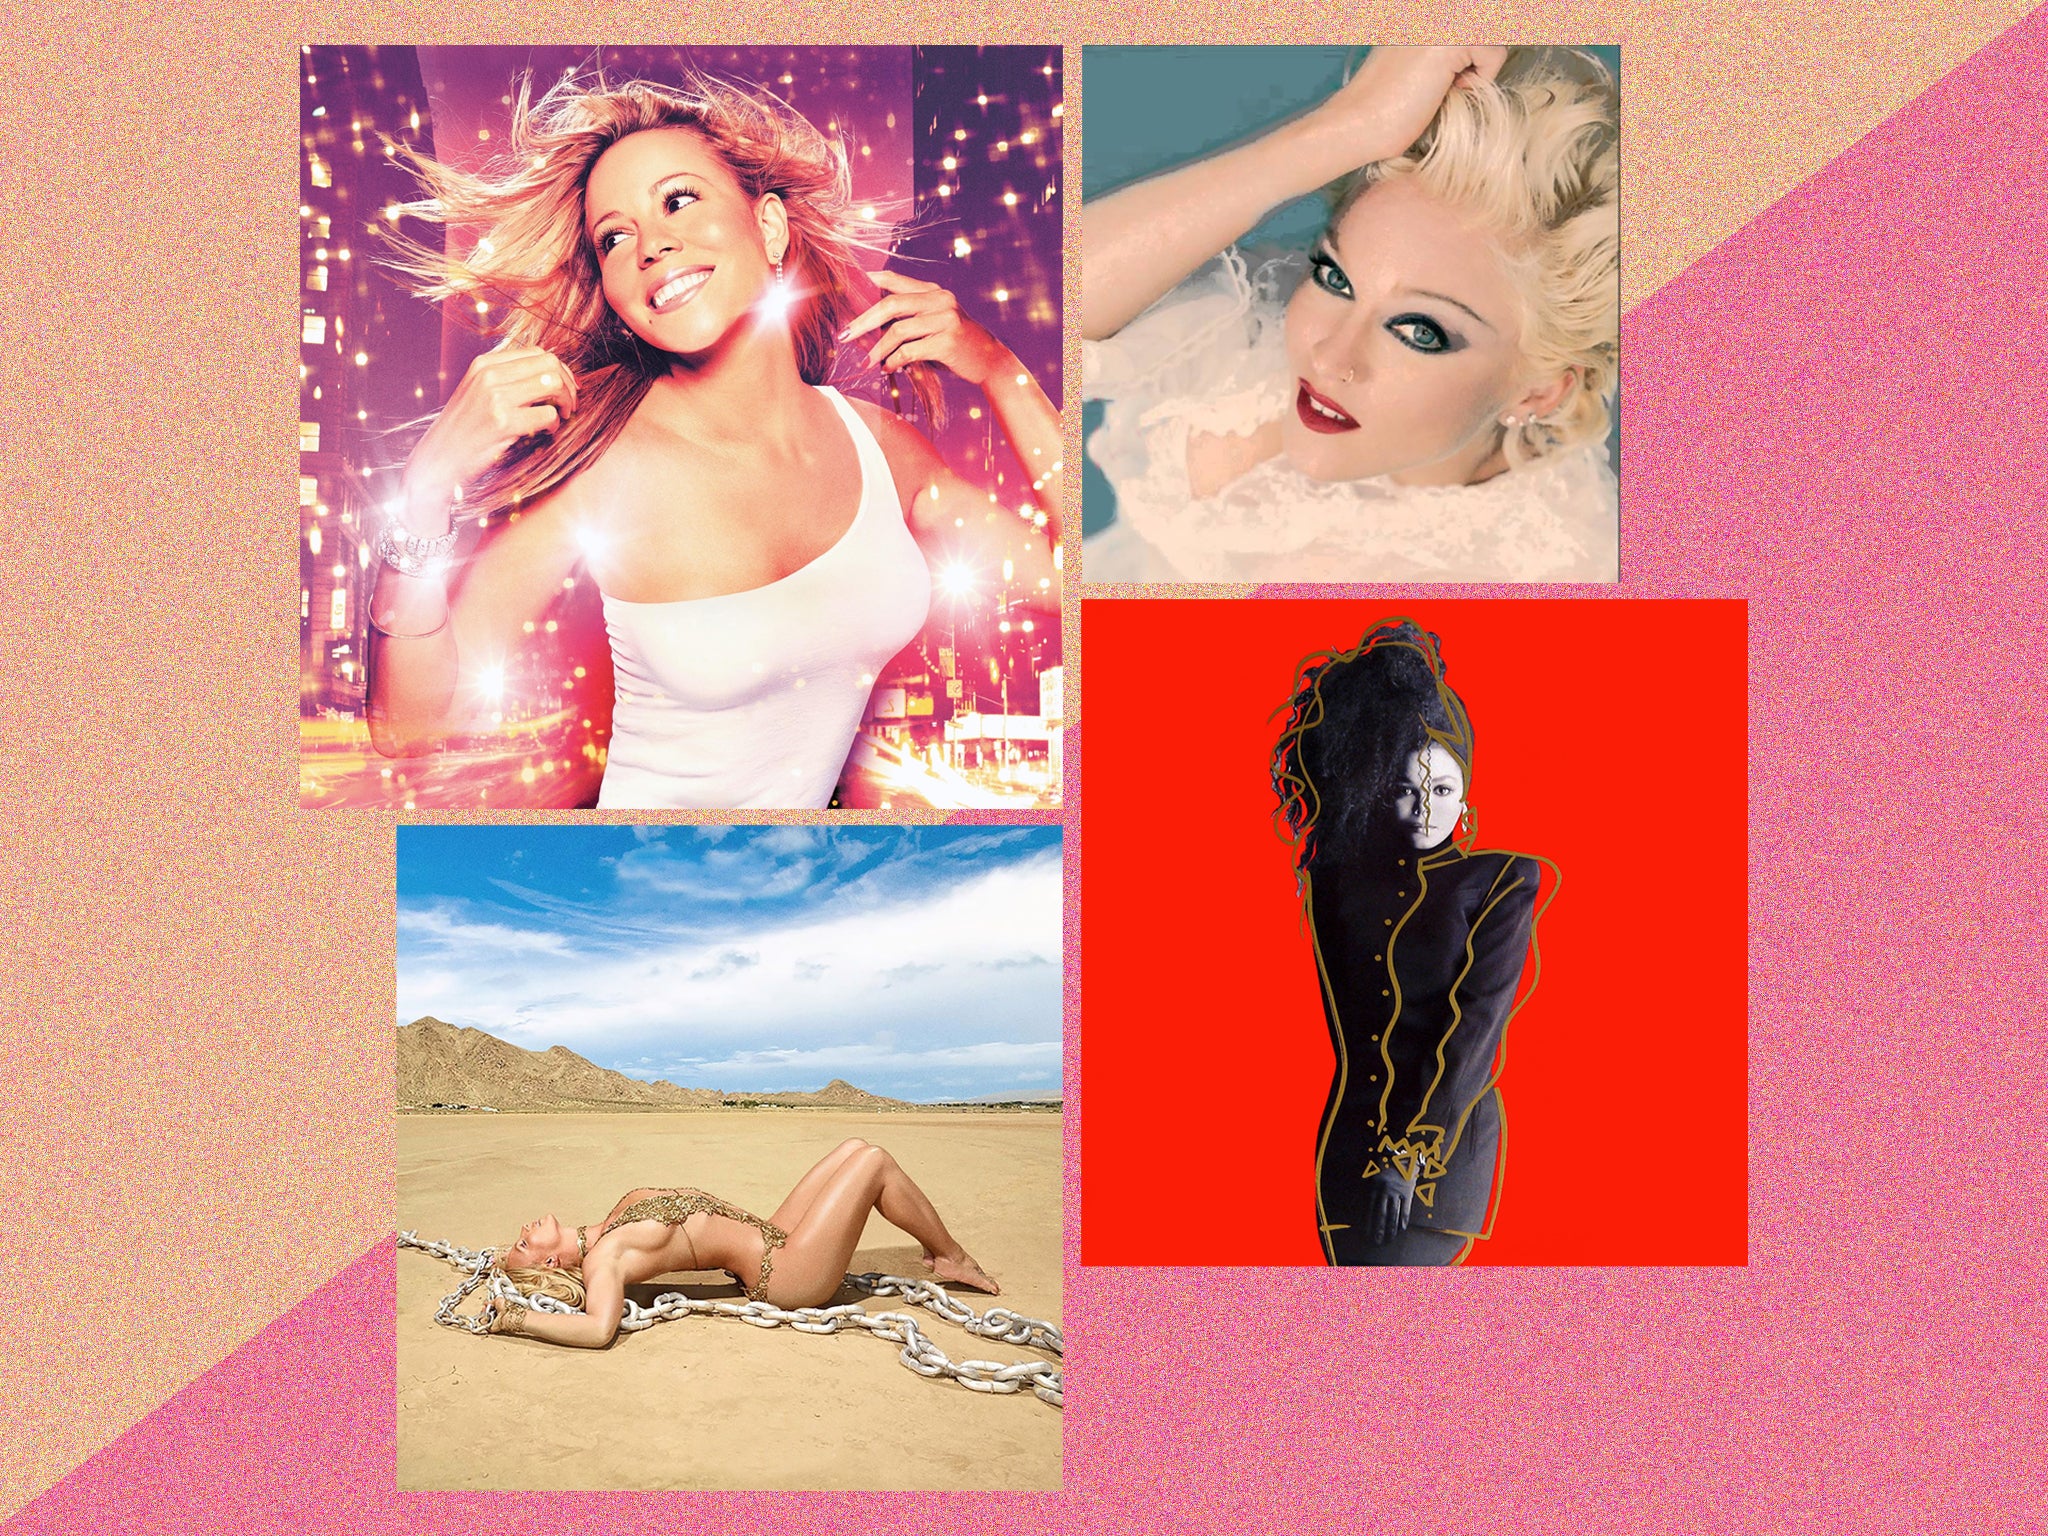 Lost greats, clockwise from top left: Mariah Carey's 'Glitter', Madonna's 'Bedtime Stories', Janet Jackson's 'Control' and Britney Spears' 'Glory'